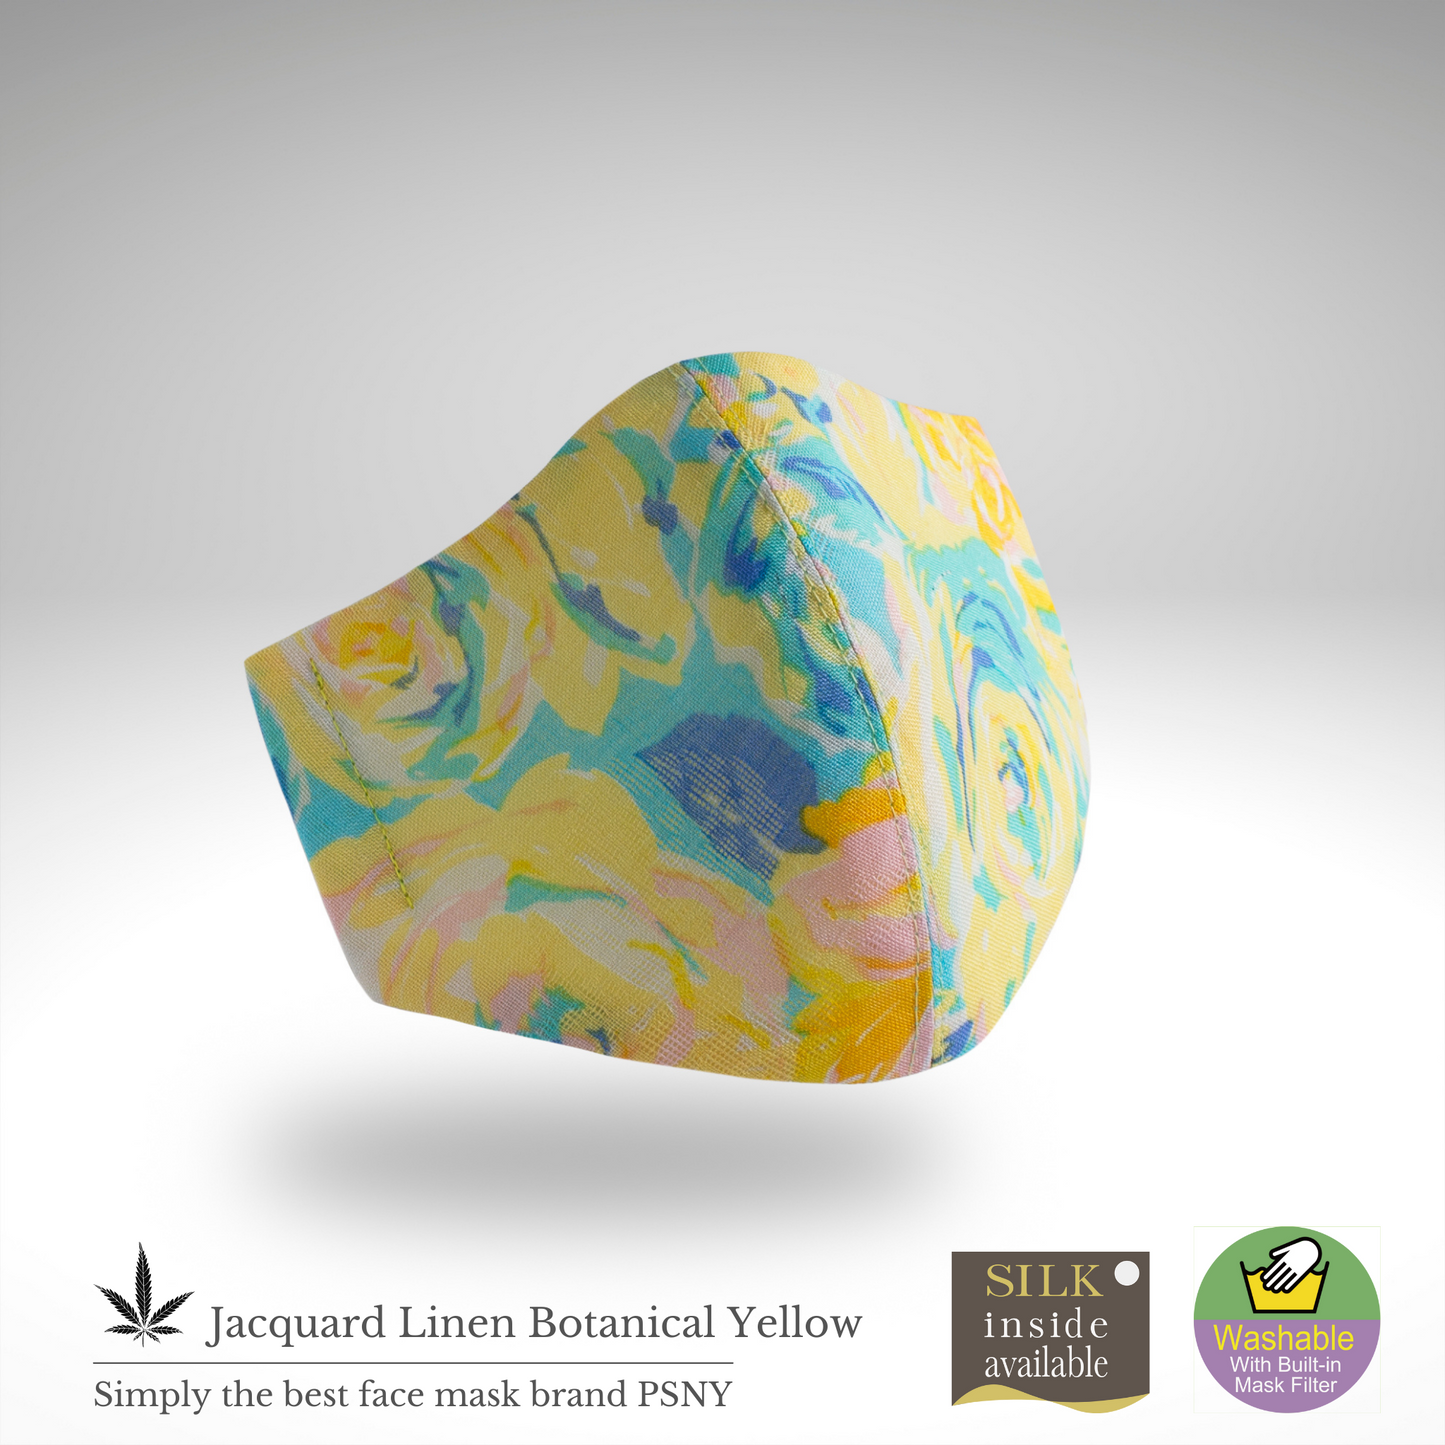 PSNY Jacquard Linen Botanical Yellow 3D Adult Mask with Nonwoven Filter JL11